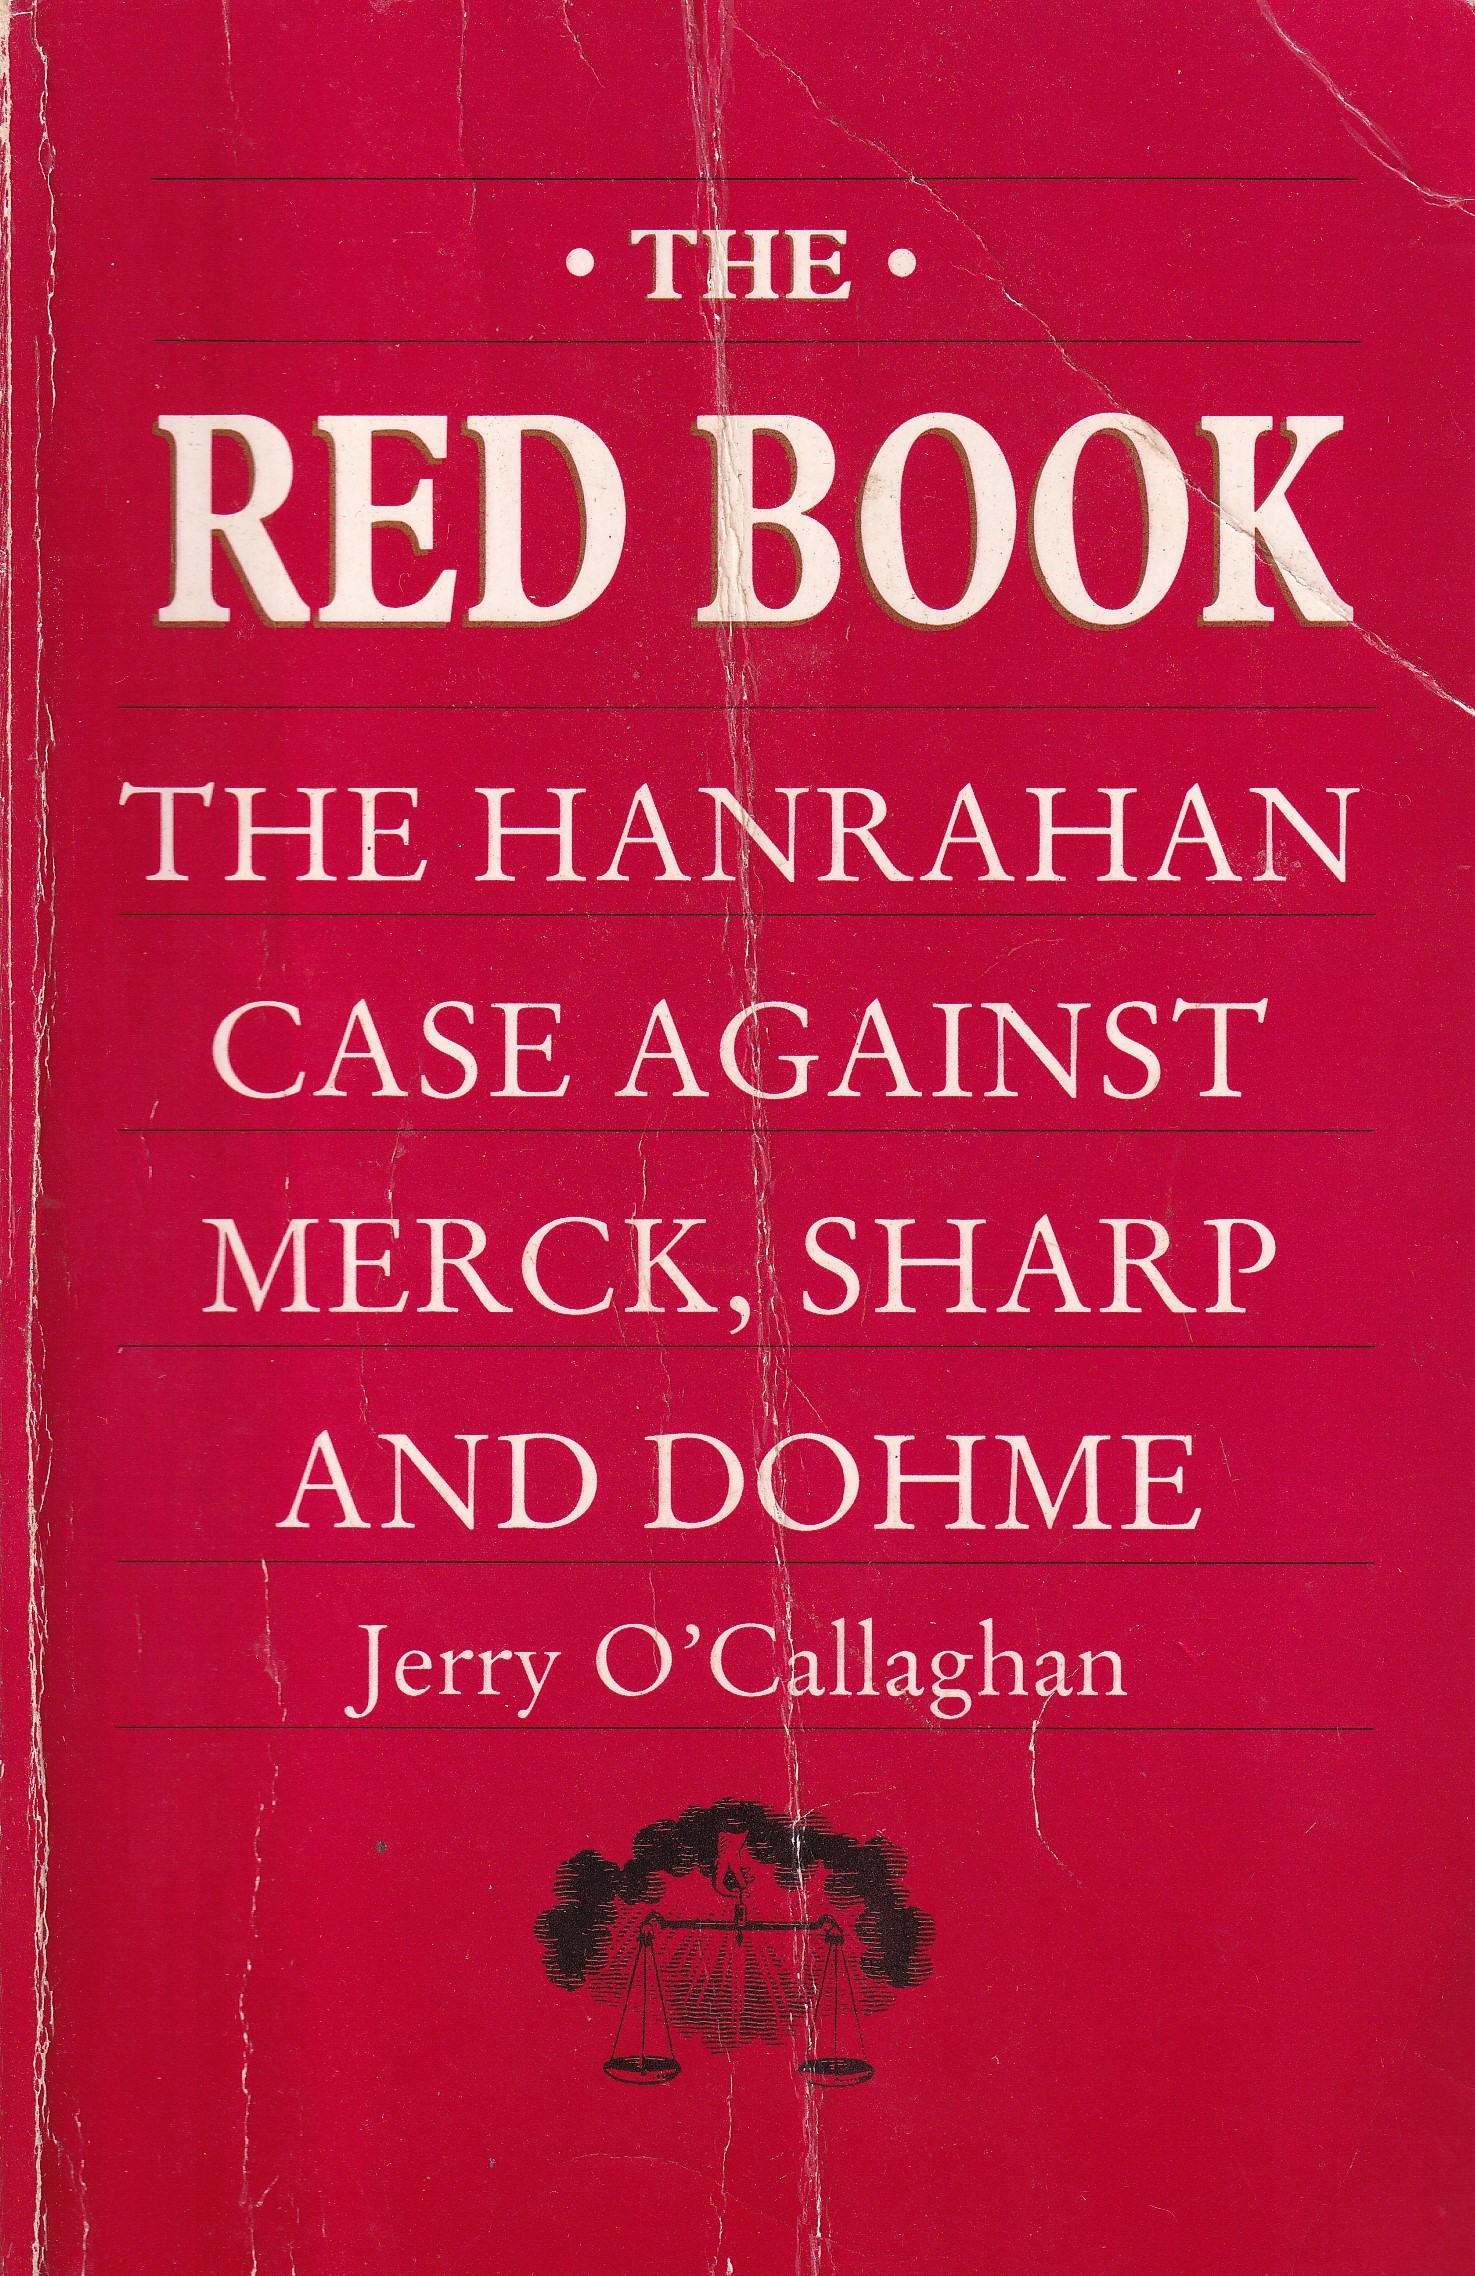 The Red Book: The Hanrahan Case Against Merck, Sharp and Dohme | Jerry O'Callaghan | Charlie Byrne's